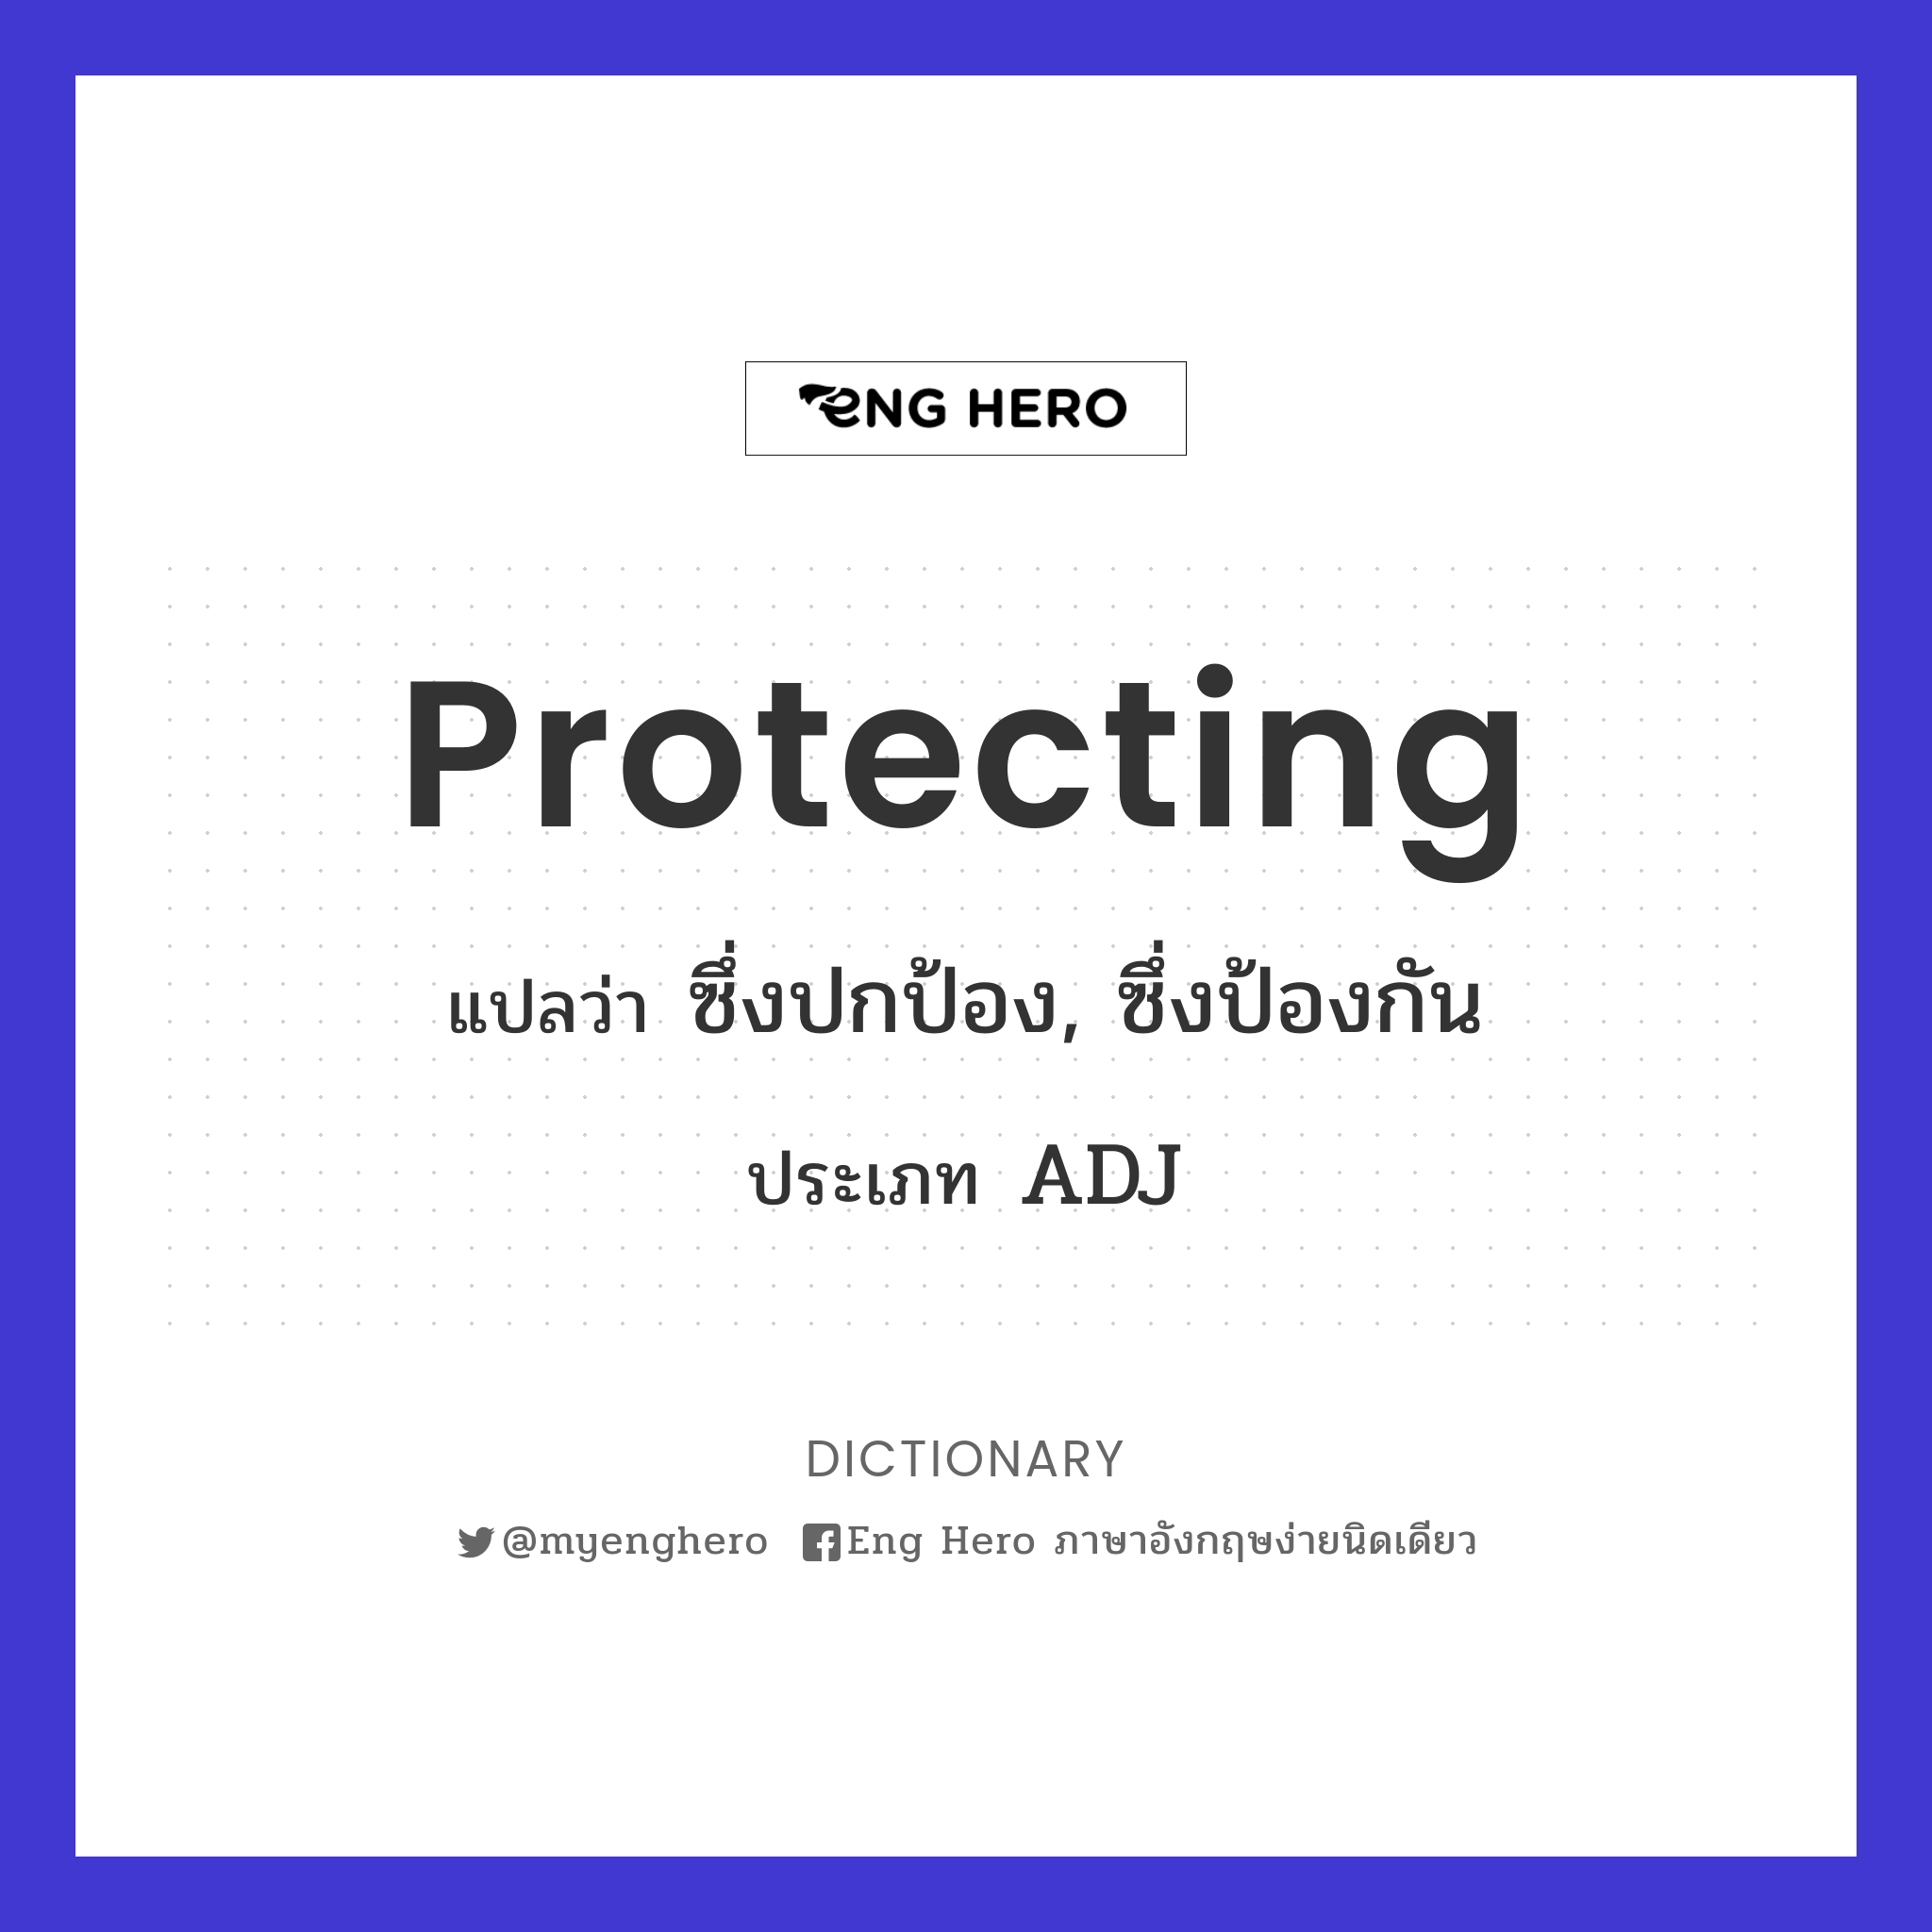 protecting